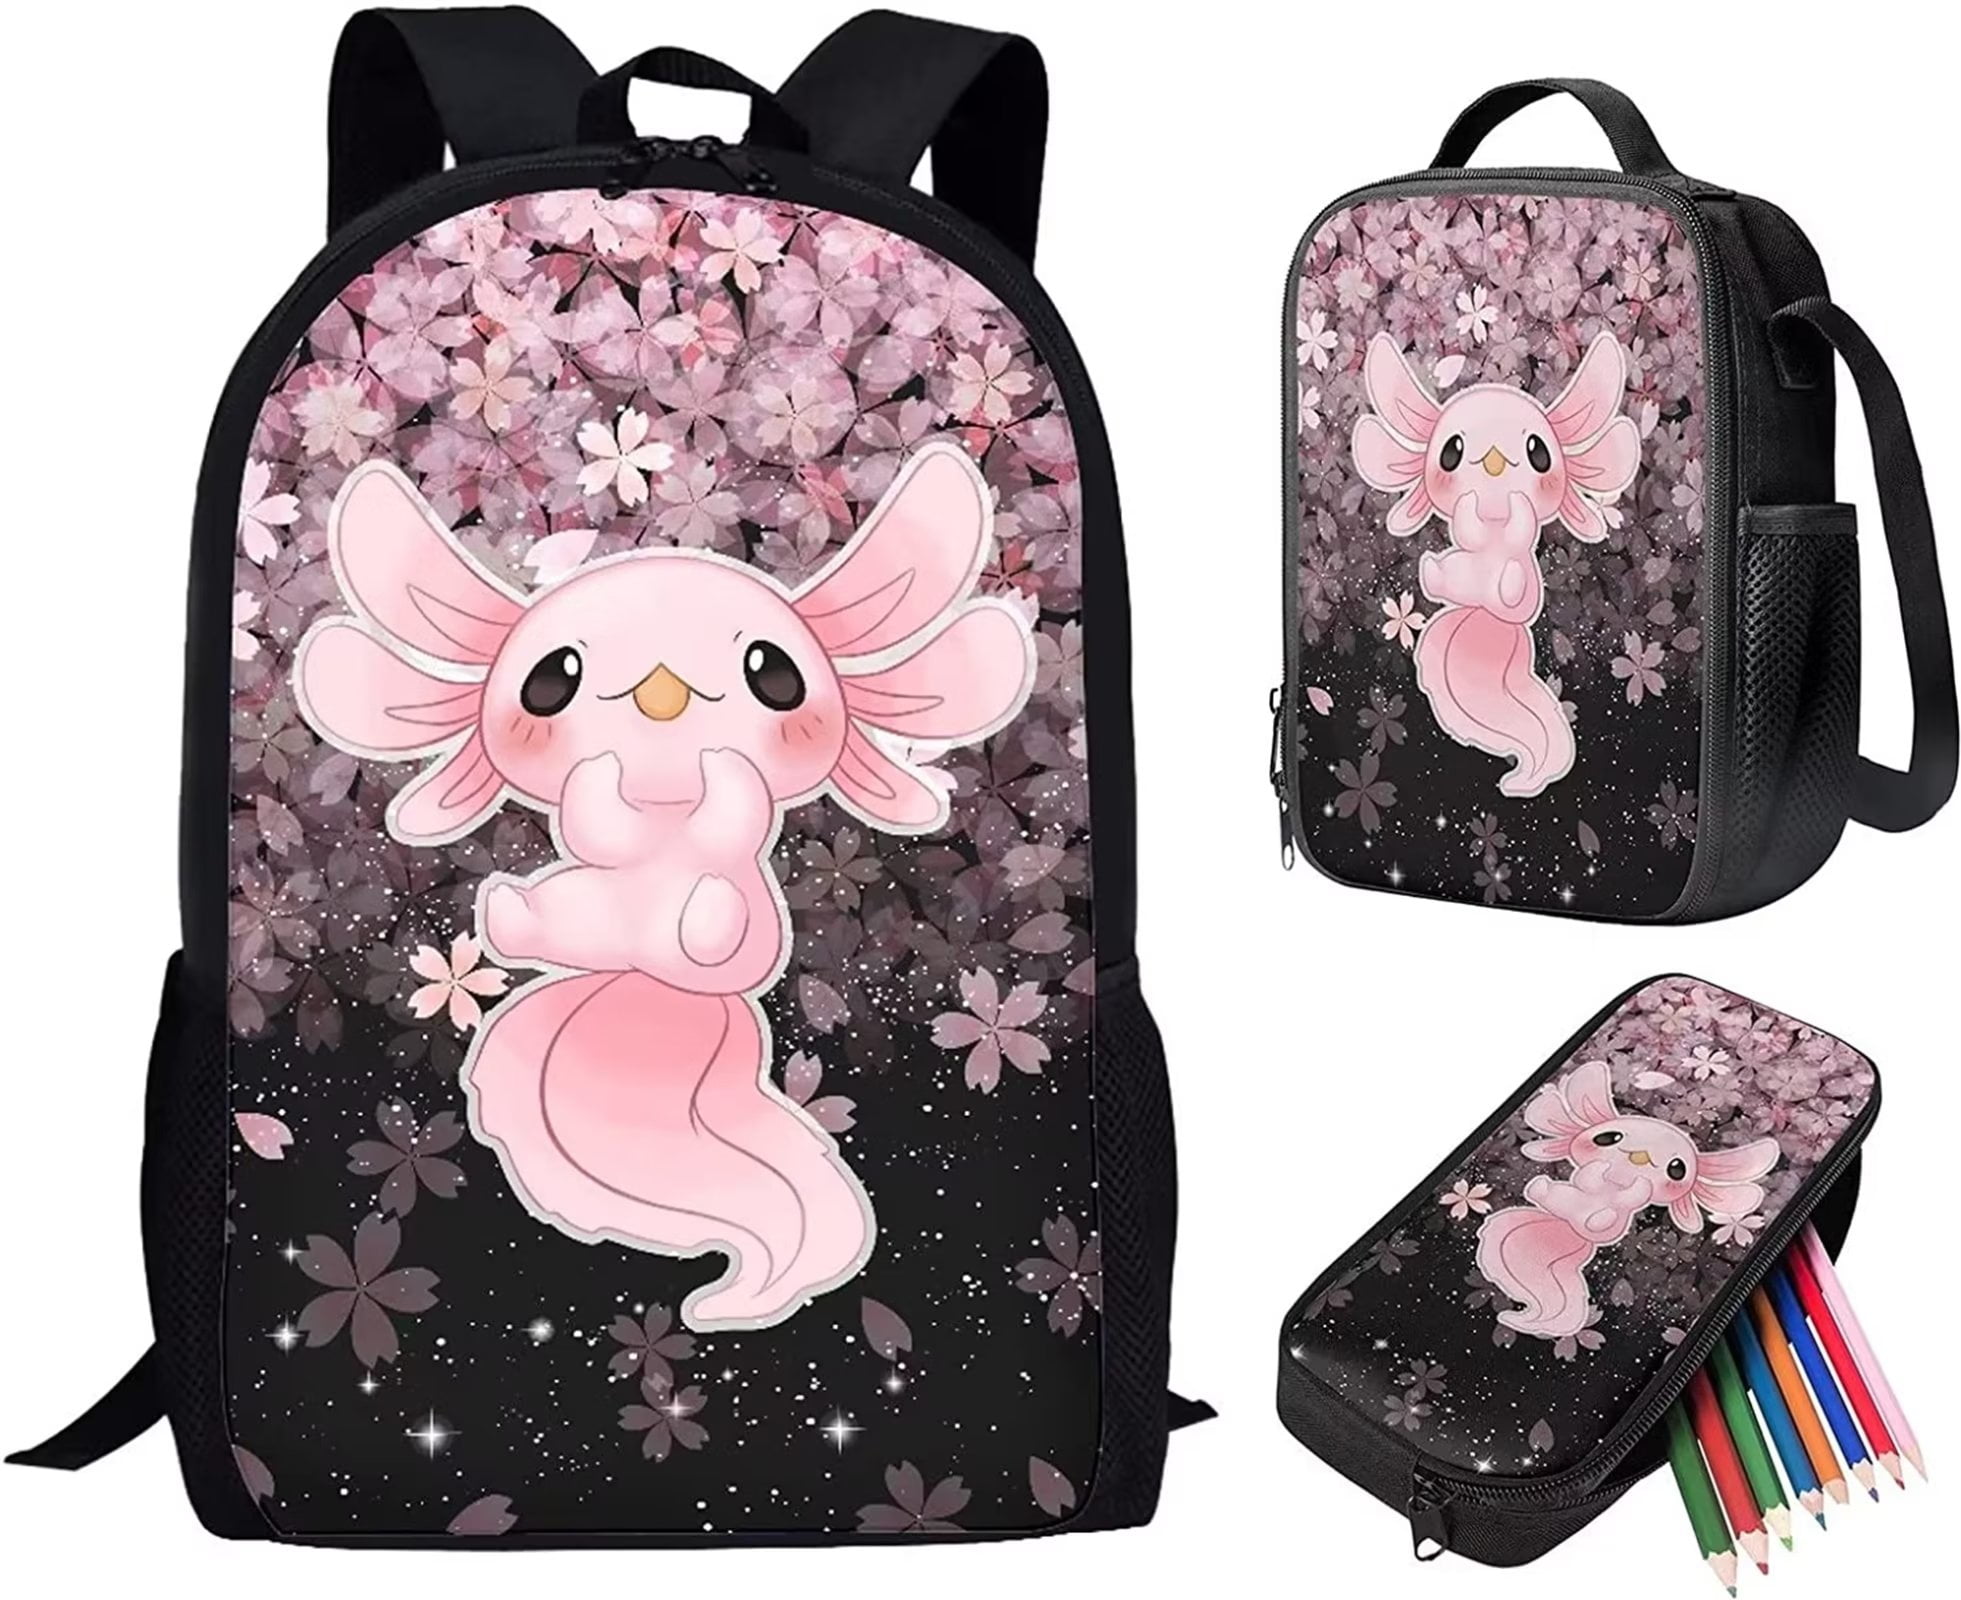 Backpack Japanese Chinese Dragon Art School Bag for Boy Girl Student Laptop  Bookbags Daypack Rucksack for College Travel Camping : : Fashion